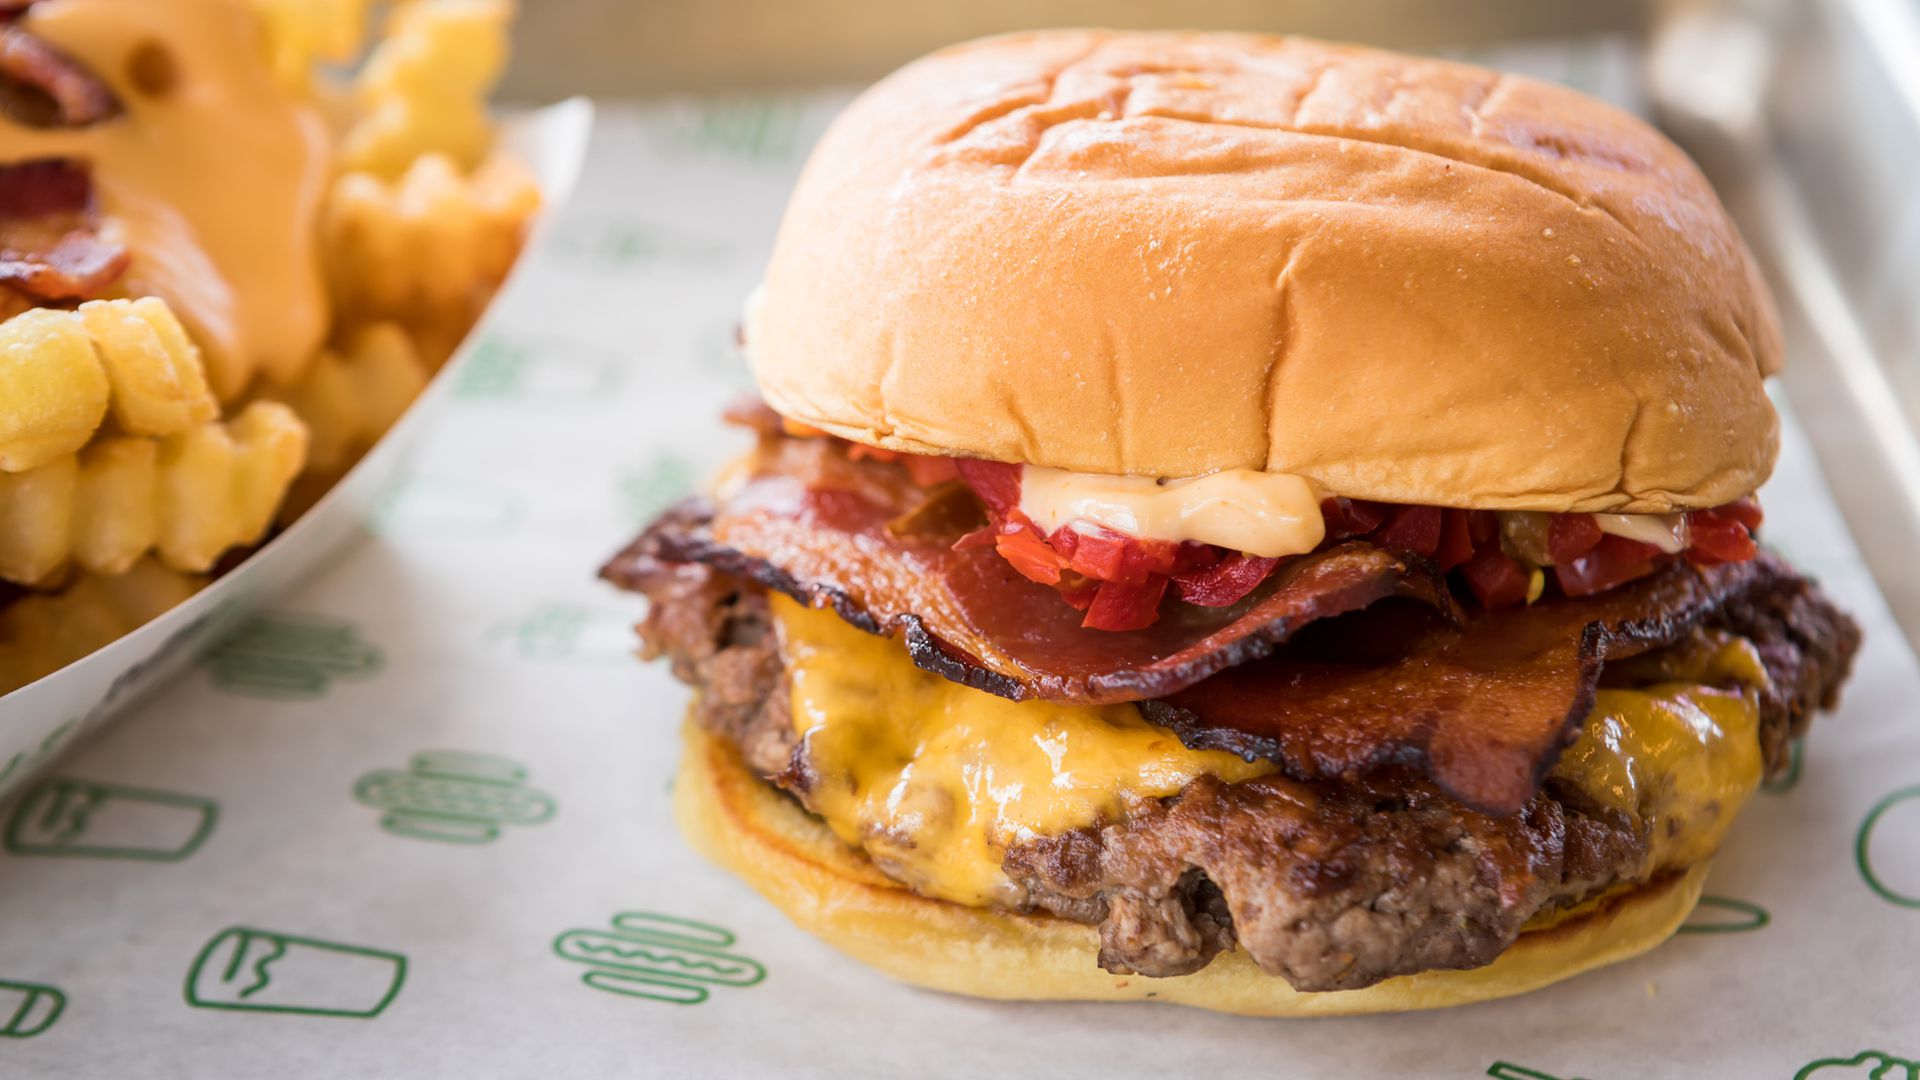 shake shack’s nationally famous smashburgers and cheese fries arrive in wine country